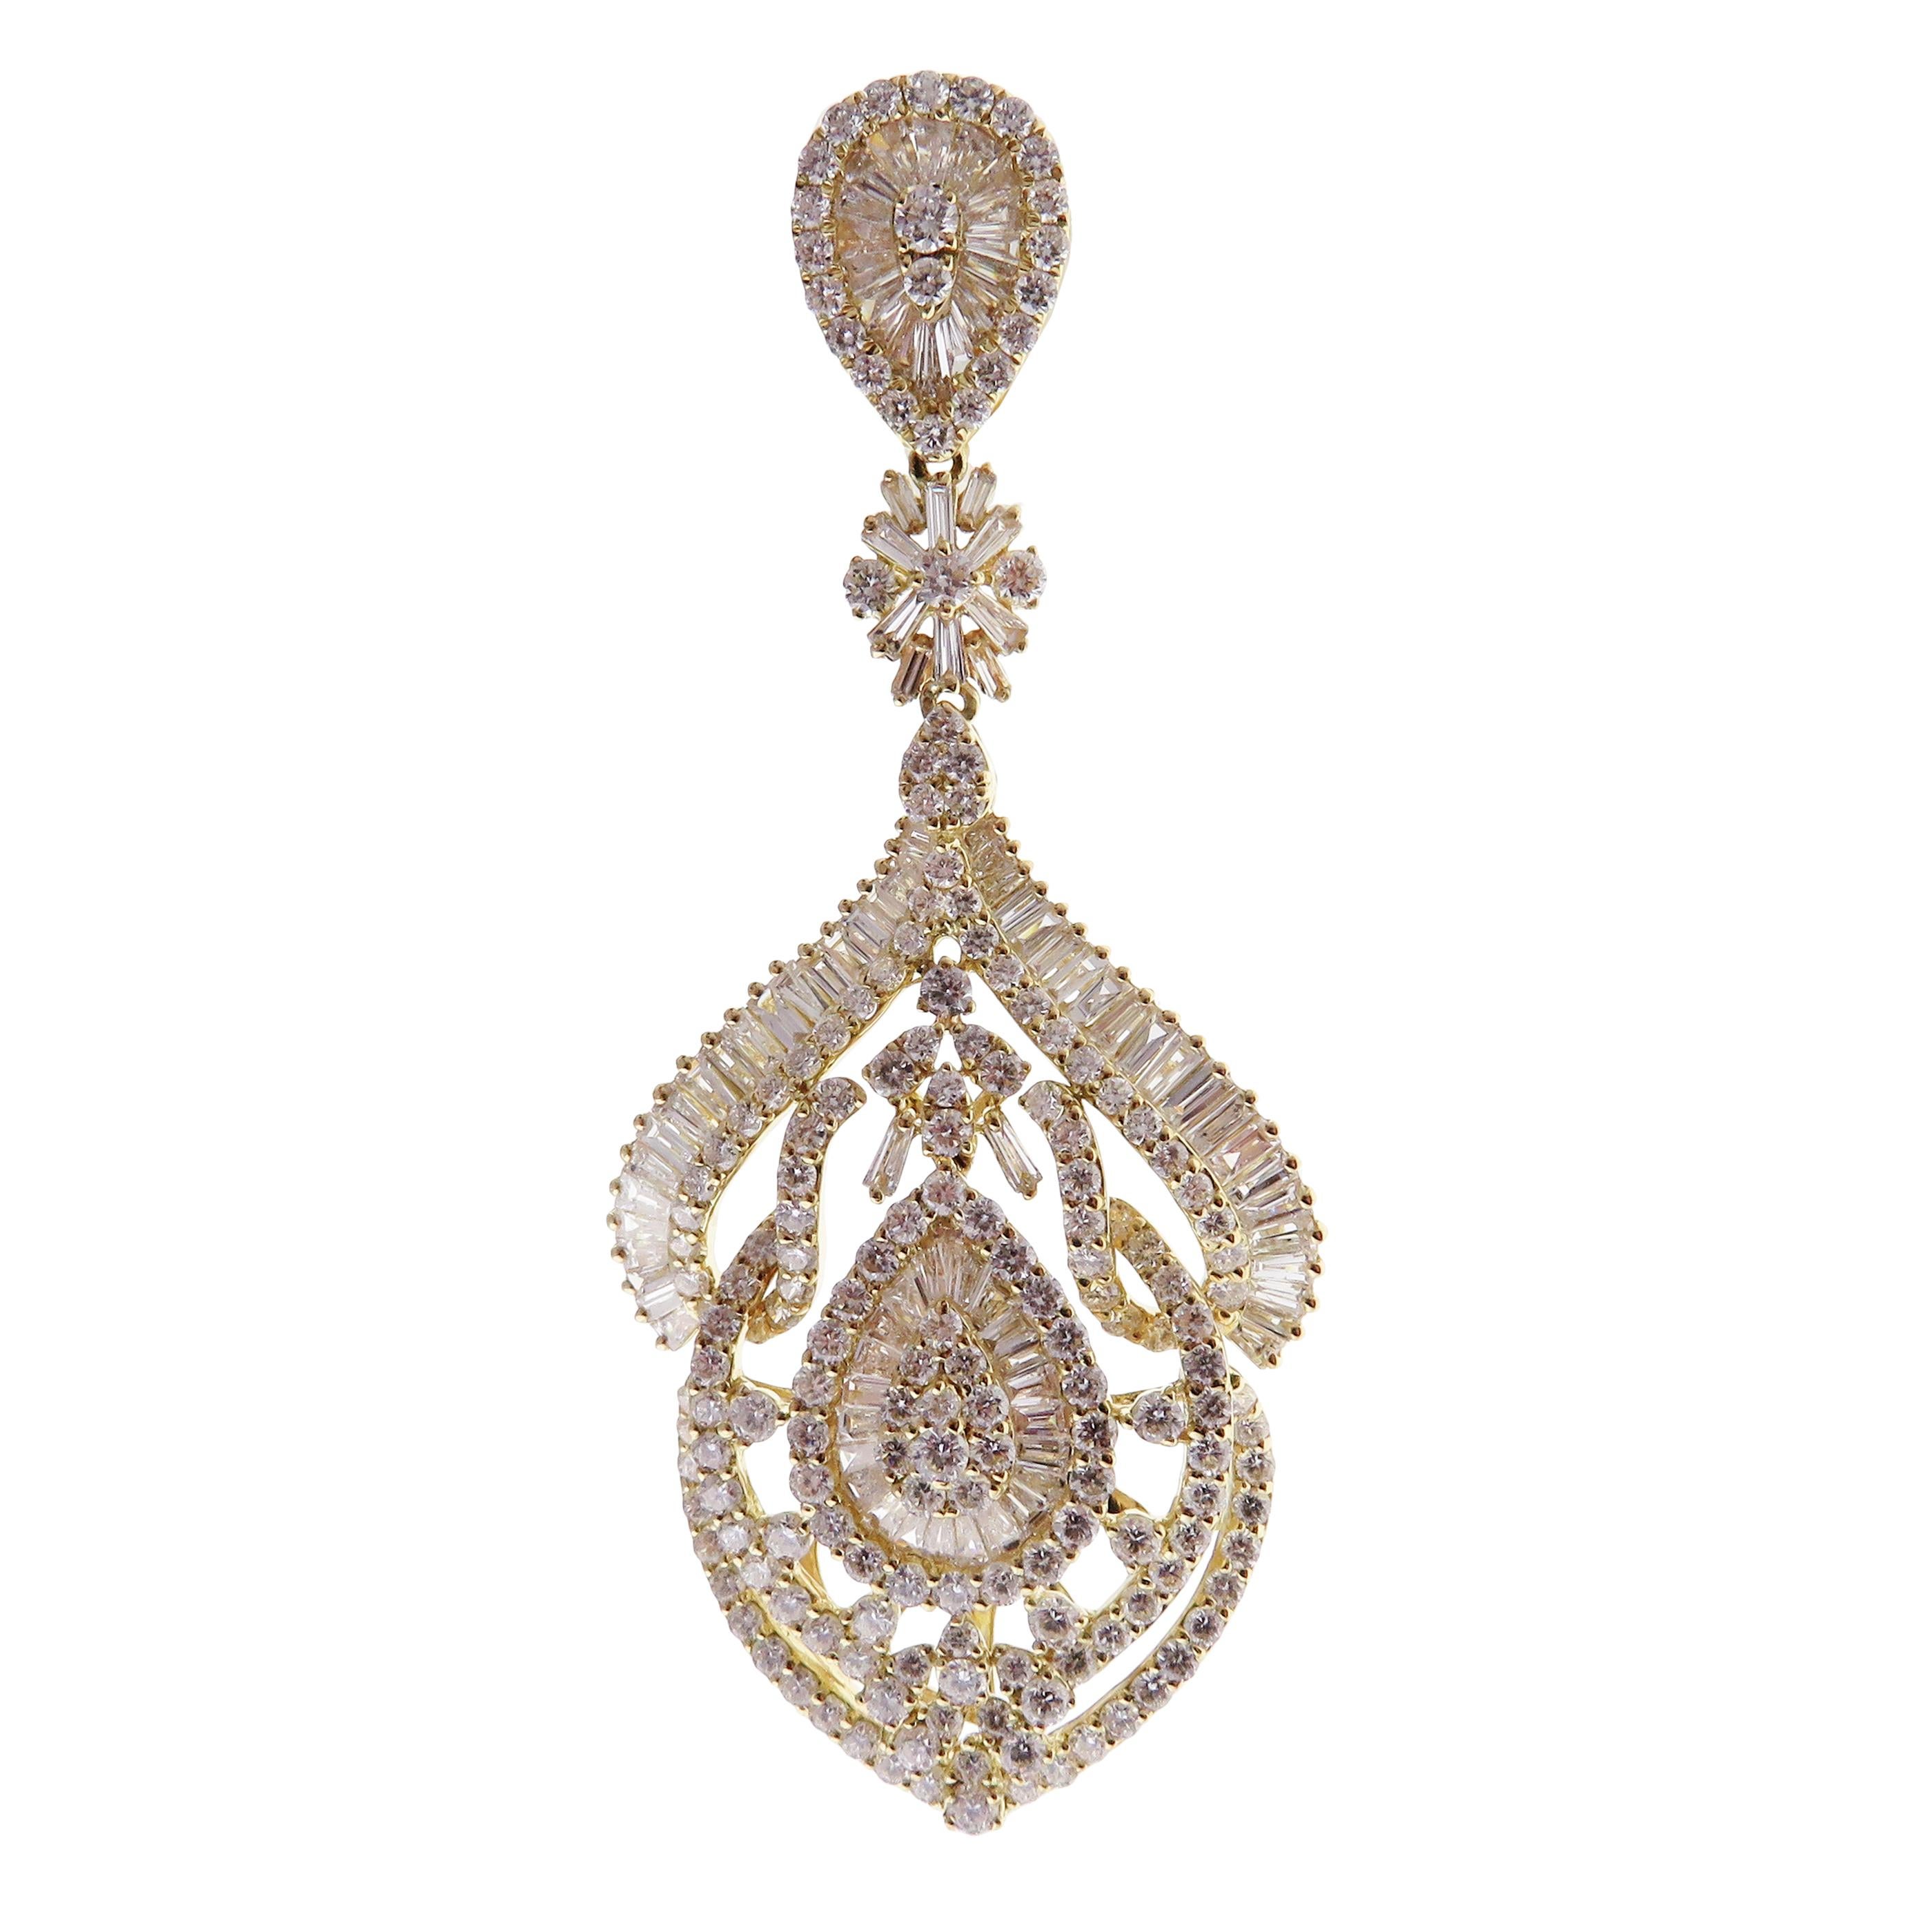 These pear curved chandelier earrings are crafted in 18-karat yellow gold, weighing approximately 11.71 total carats of SI-V Quality white diamond. French clip backing. 

Our Ballroom Chandelier Collection feature earrings for those with bold/classy